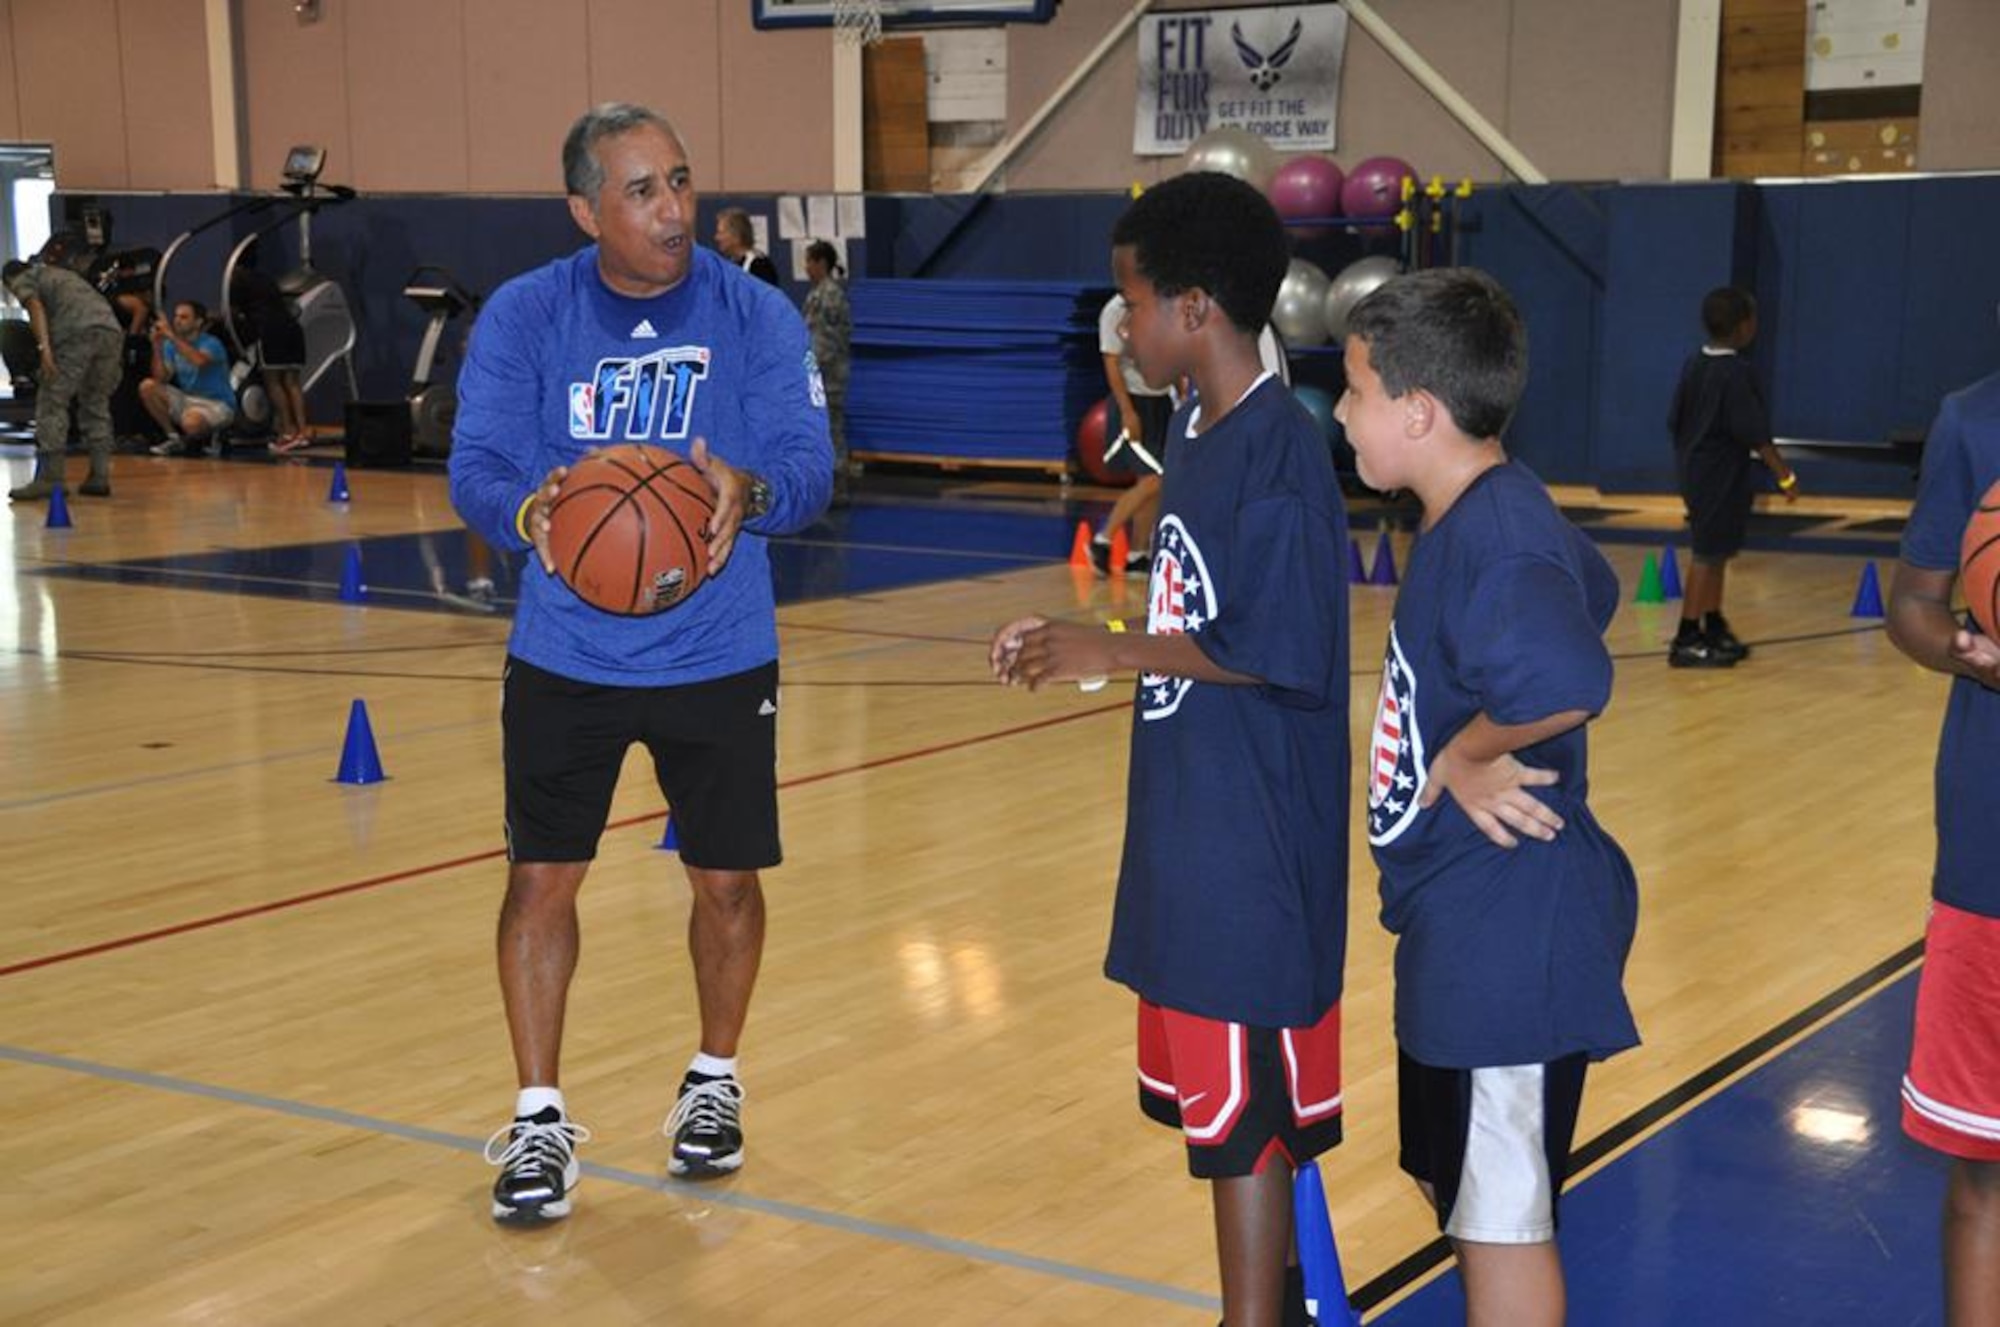 National Basketball Association clinician, Frank Lopez, instructs military dependents on proper ball-handling techniques at March Air Reserve Base, Calif., during the NBA Cares Hoops for Troops basketball clinic Sunday, Sept. 8, 2013. The NBA Cares program sponsored the event in conjunction with the Healthy Base Initiative kickoff. (U.S. Air Force photo/Master Sgt. Linda Welz)